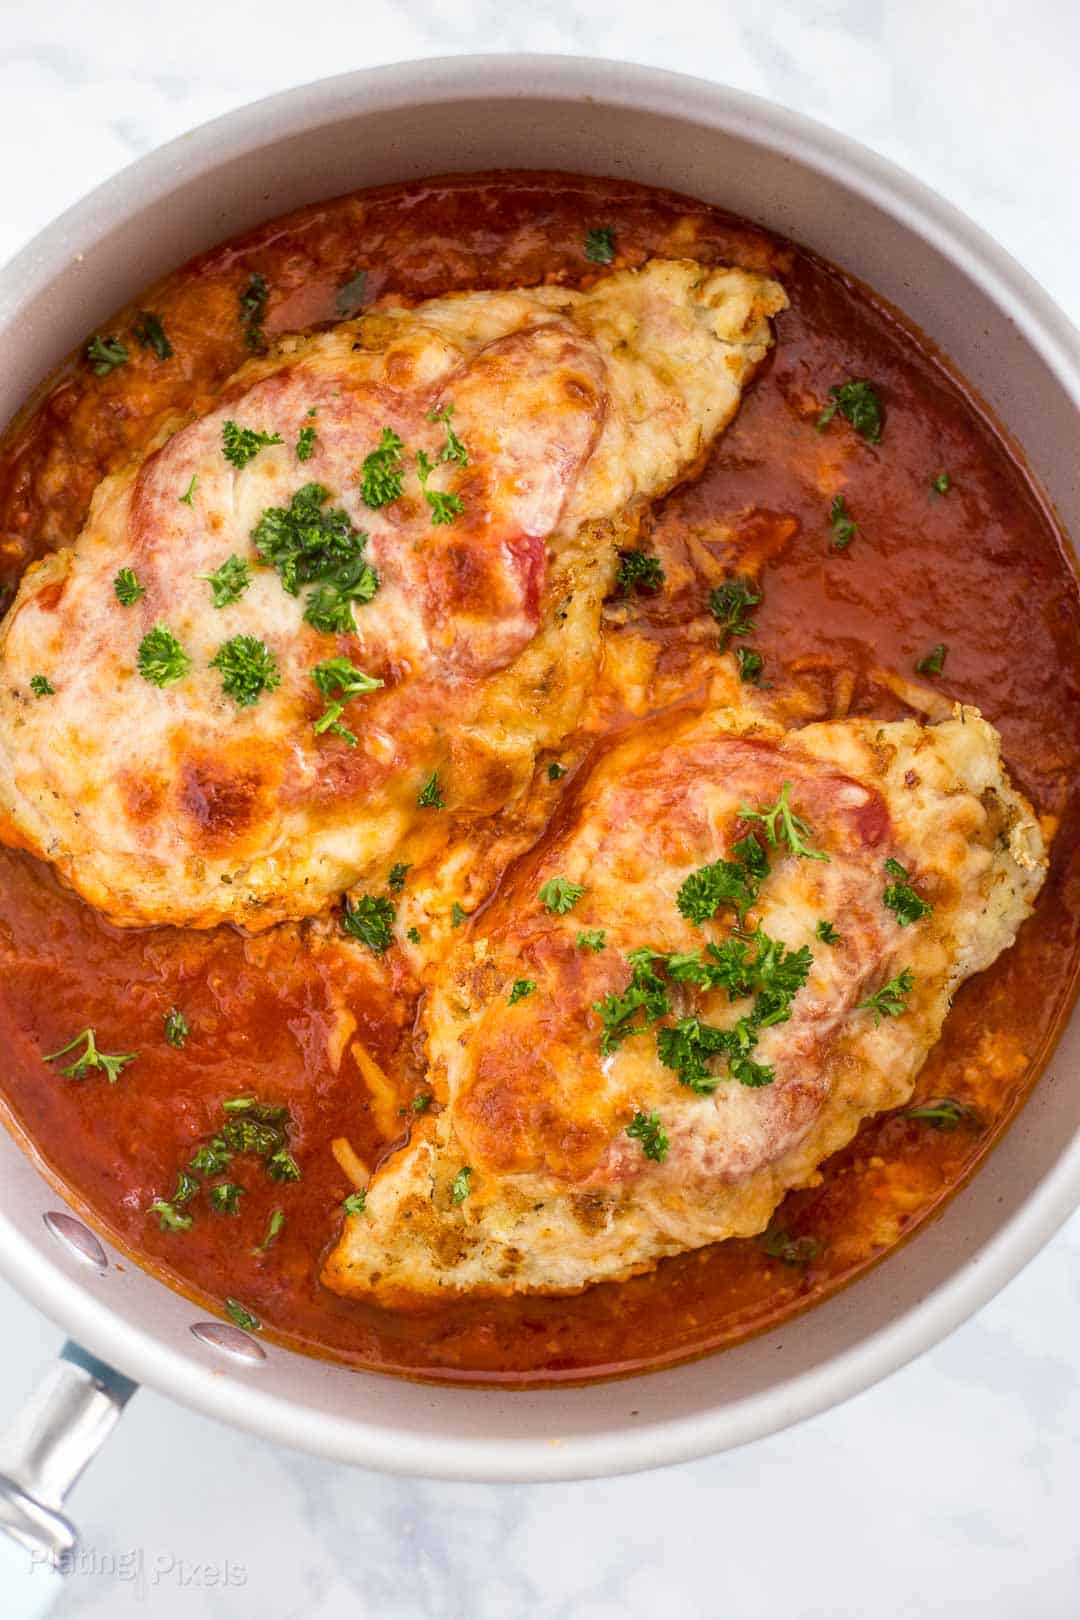 Just baked Keto Chicken Parmesan in an oven-safe pan